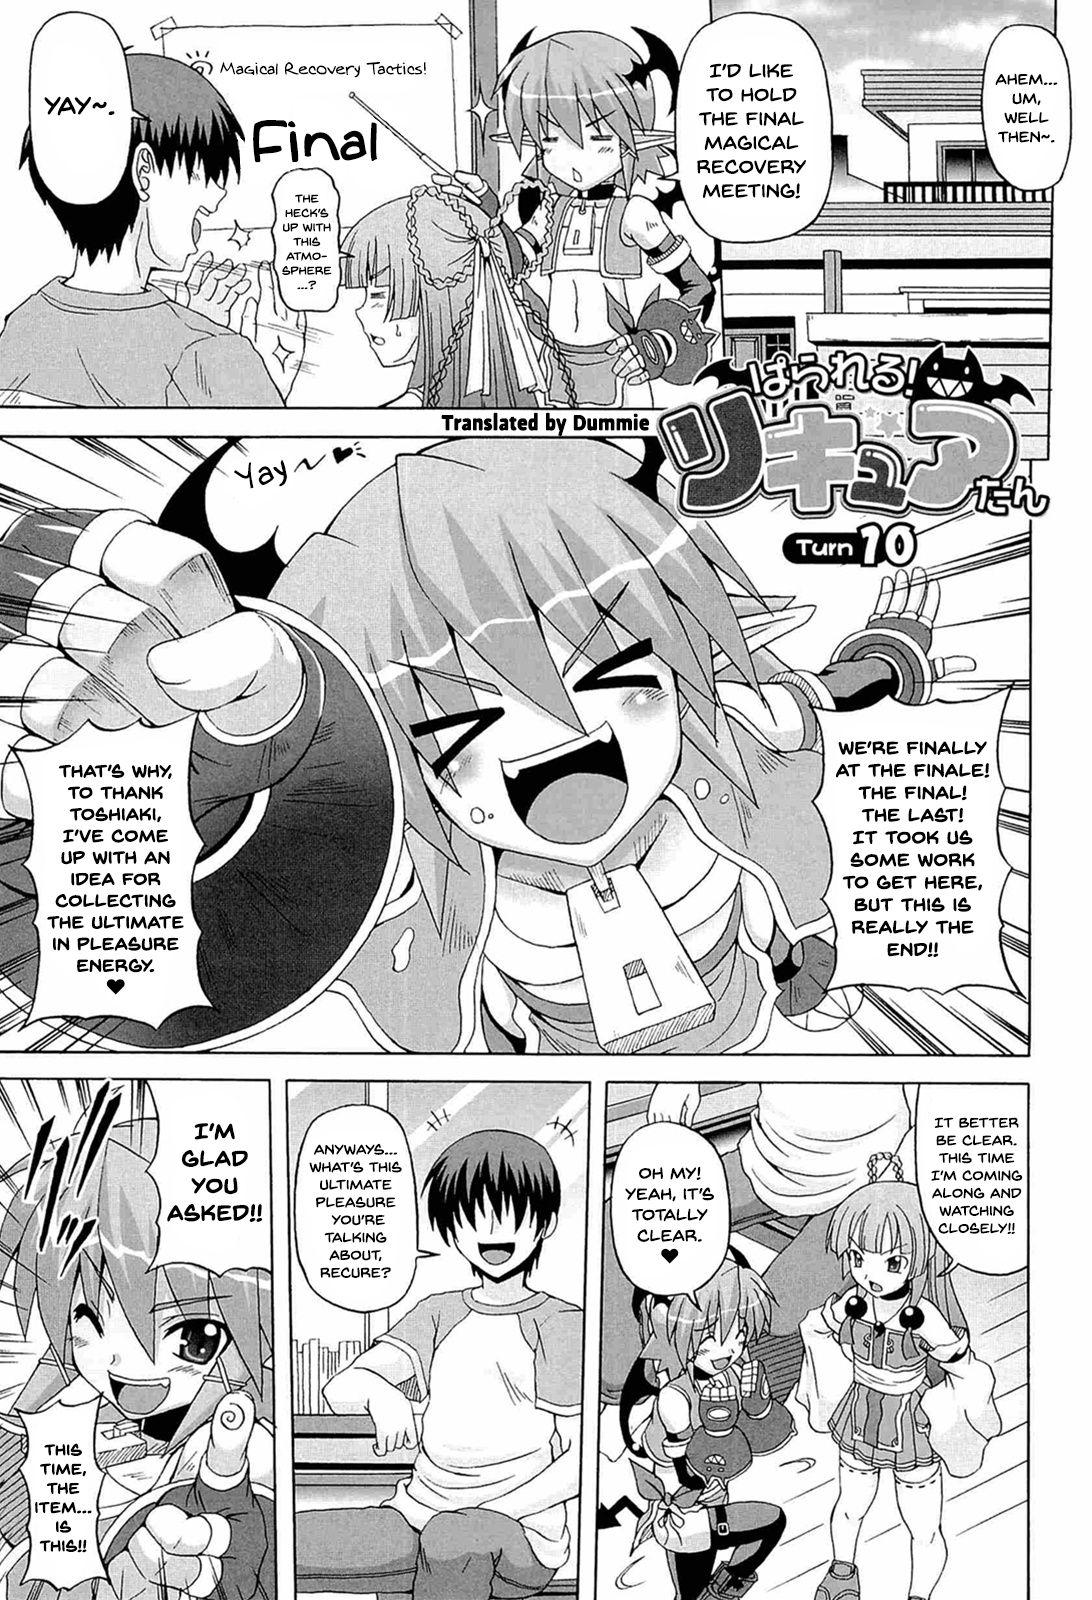 Bj Parallel! Recure-tan Turn 10 Ano - Page 1